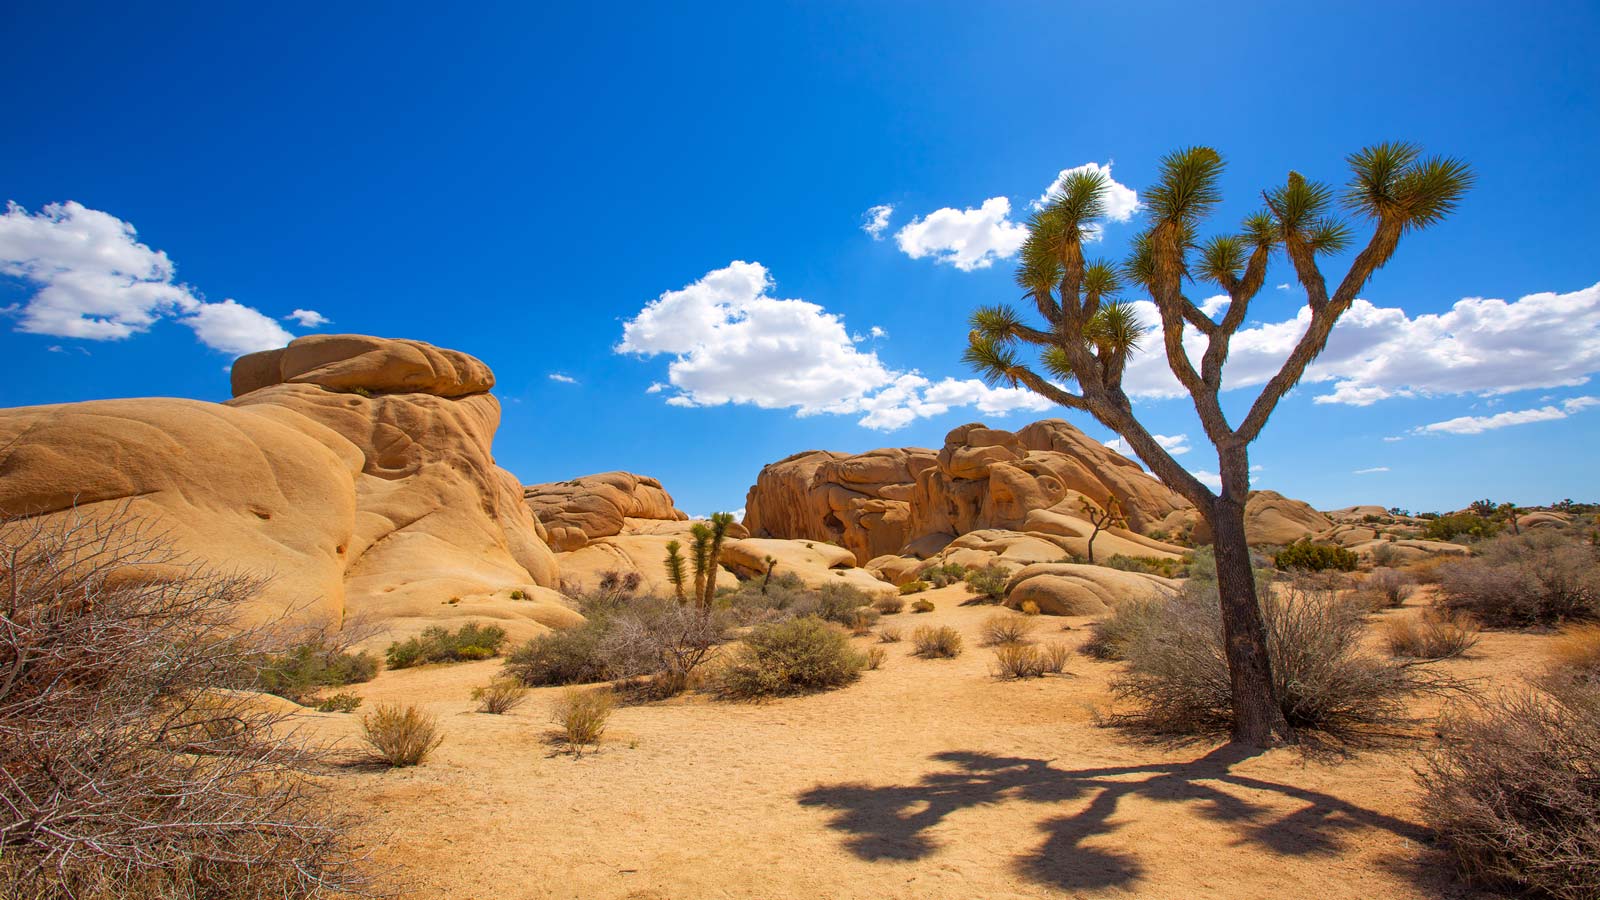 <p><span><a href="https://www.nps.gov/jotr/index.htm" rel="nofollow noopener">Joshua Tree</a> is not just an iconic U2 album but also the magical place where the Mojave and Colorado deserts meet in southern California. Just an hour’s drive from Palm Springs, this natural wonder hosts a plethora of fascinating wildlife, superb star-gazing, and fabulous hiking and camping adventures. </span></p><p><span>Visitors can buy their day passes online or use their National Parks Pass if they already have one. We spent the day exploring this age-old ecosystem created by strong winds and wind torrents.</span></p>